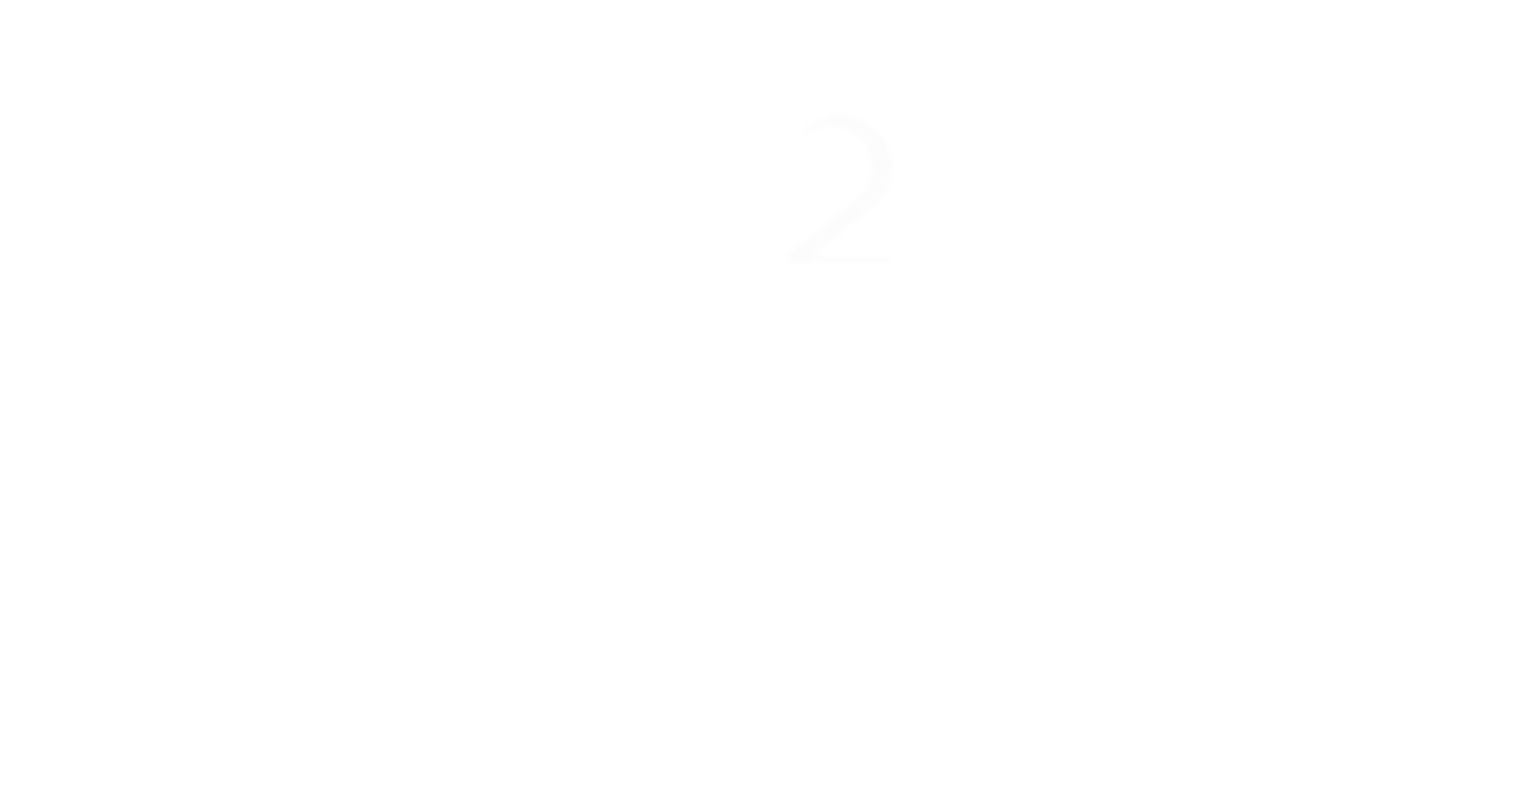 MID SIZE WATCHES good things, small packages